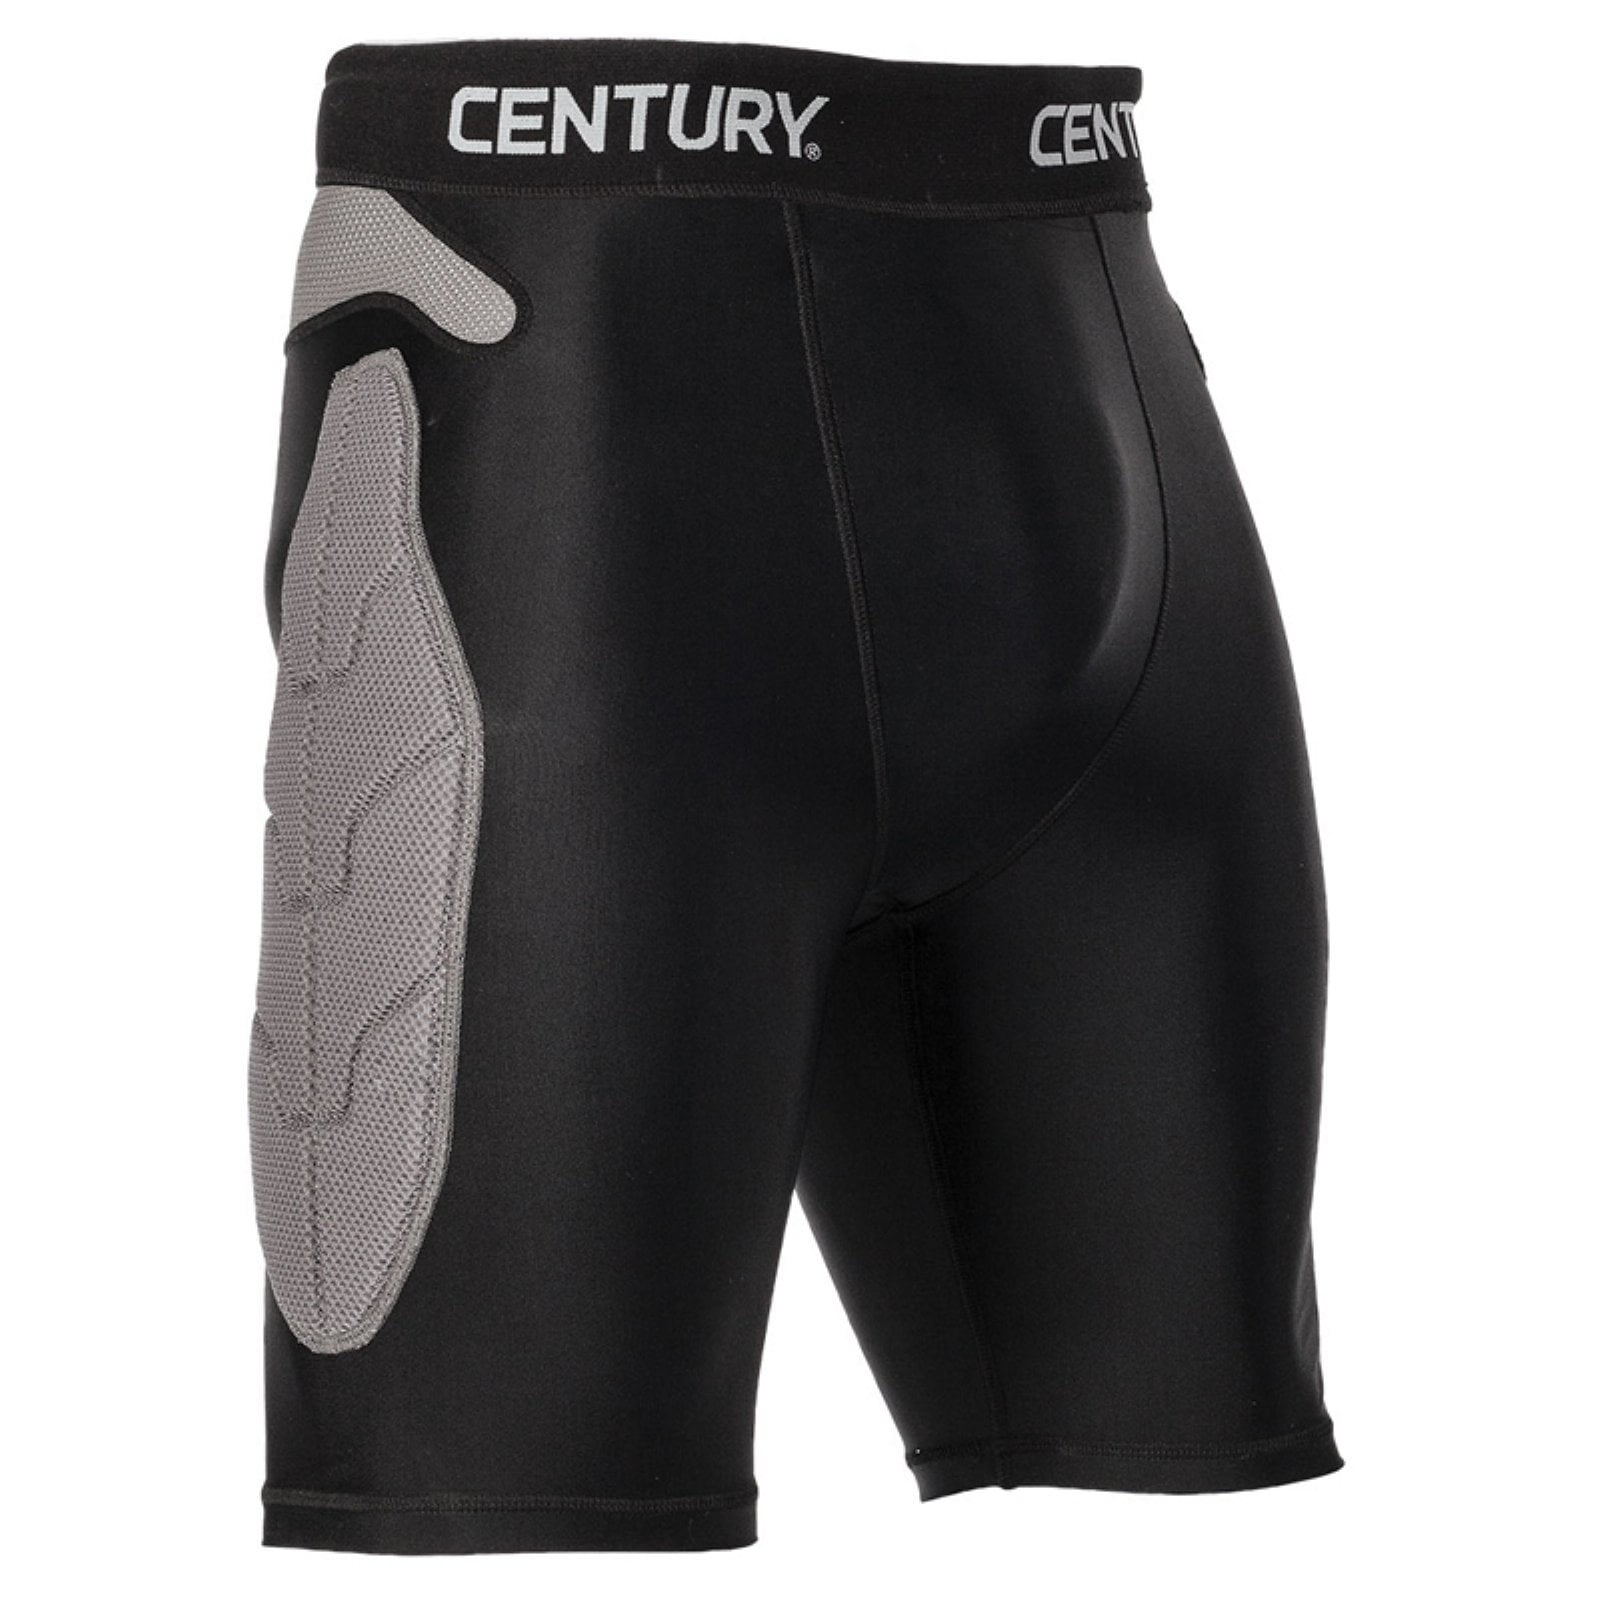 Century Padded Compression Shorts Black Youth Small New